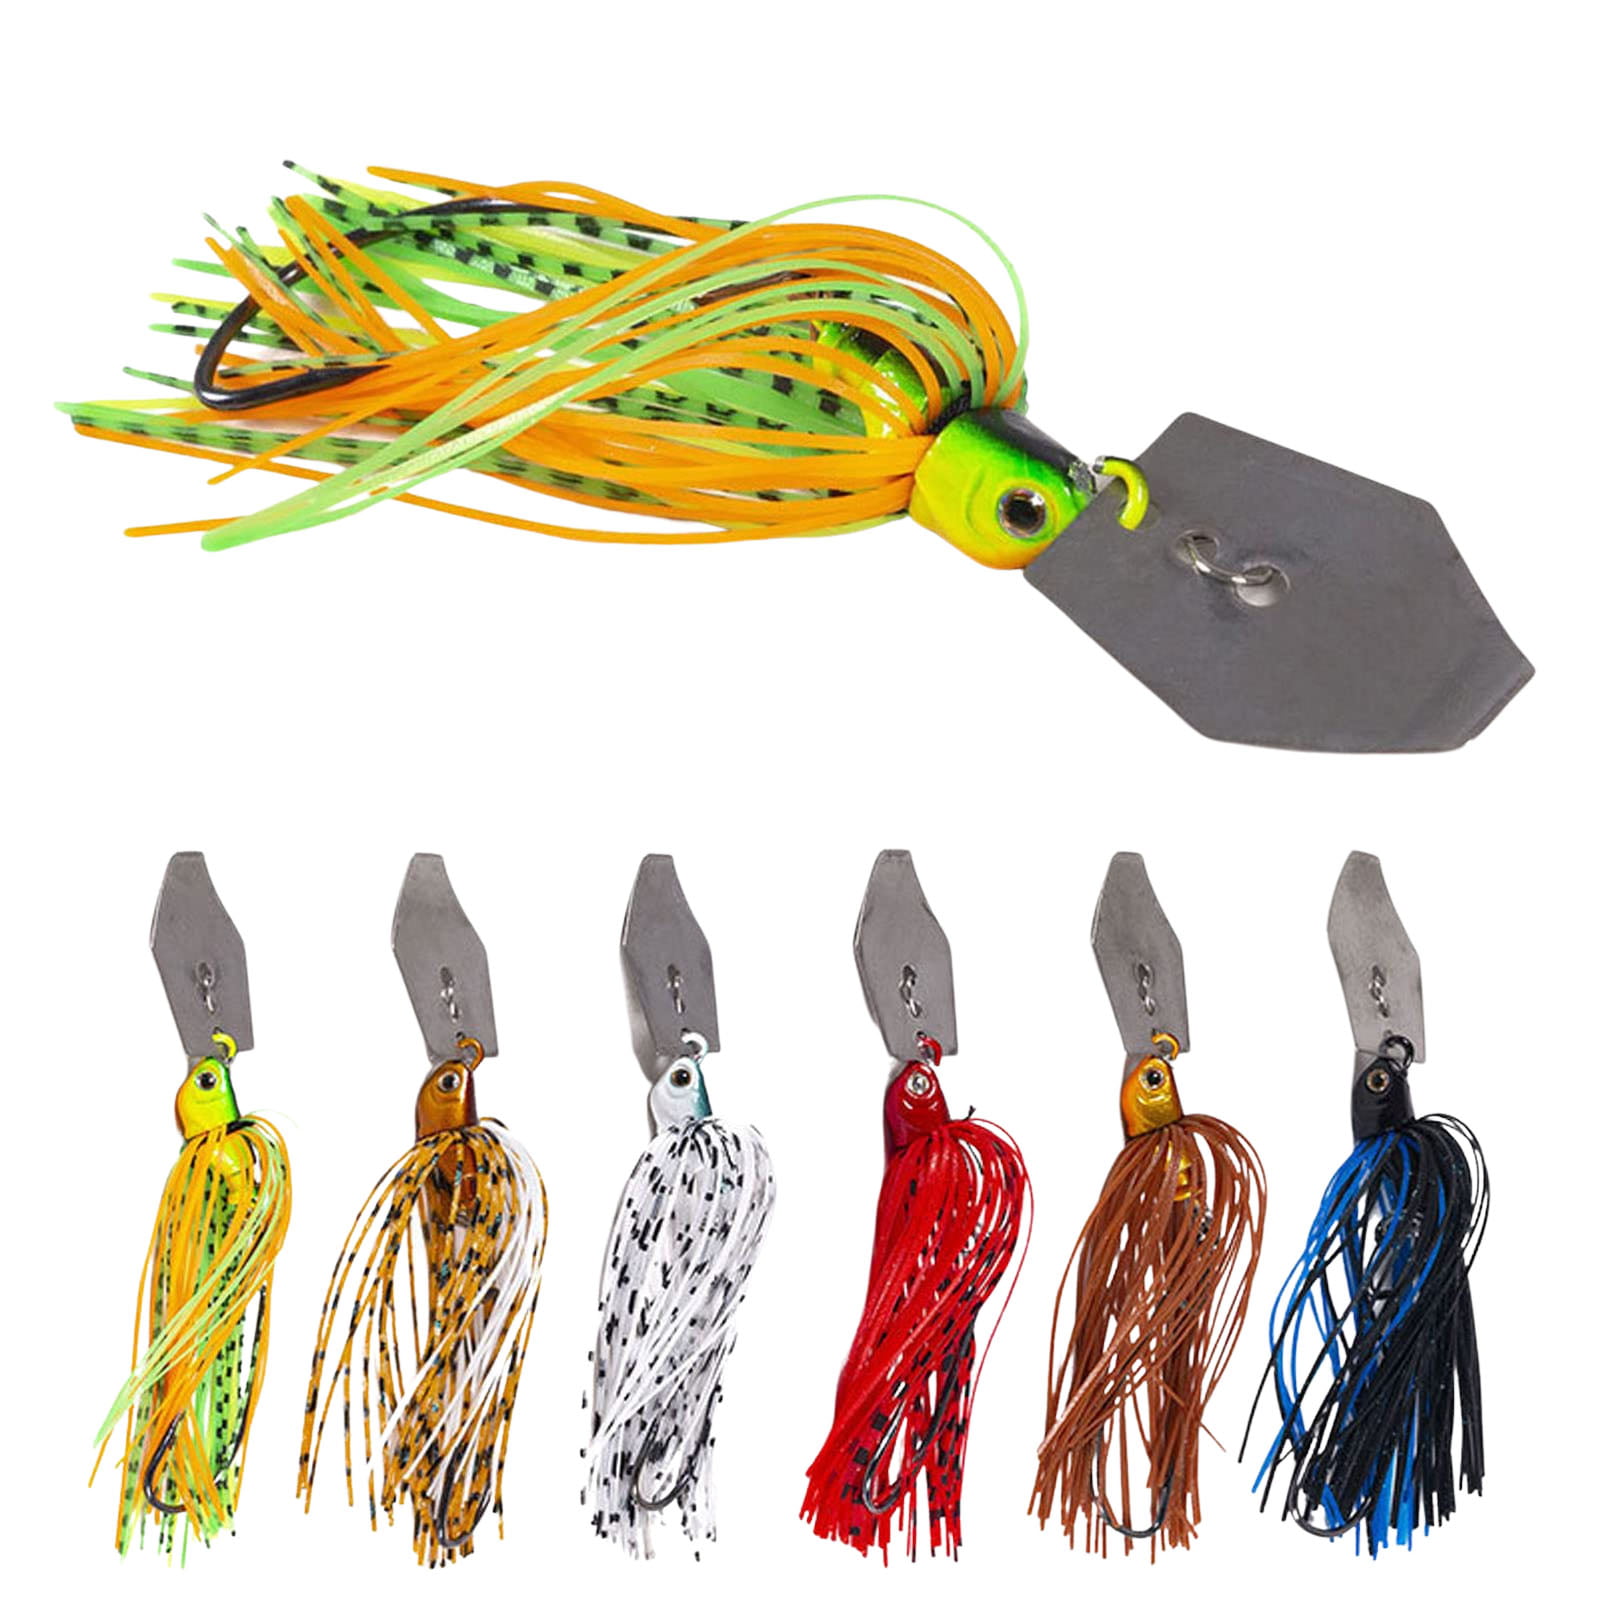 6pcs Fishing Lures Set W/ Silicone Skirt Buzzbait Lead Head Bass Trout Jig Lure 